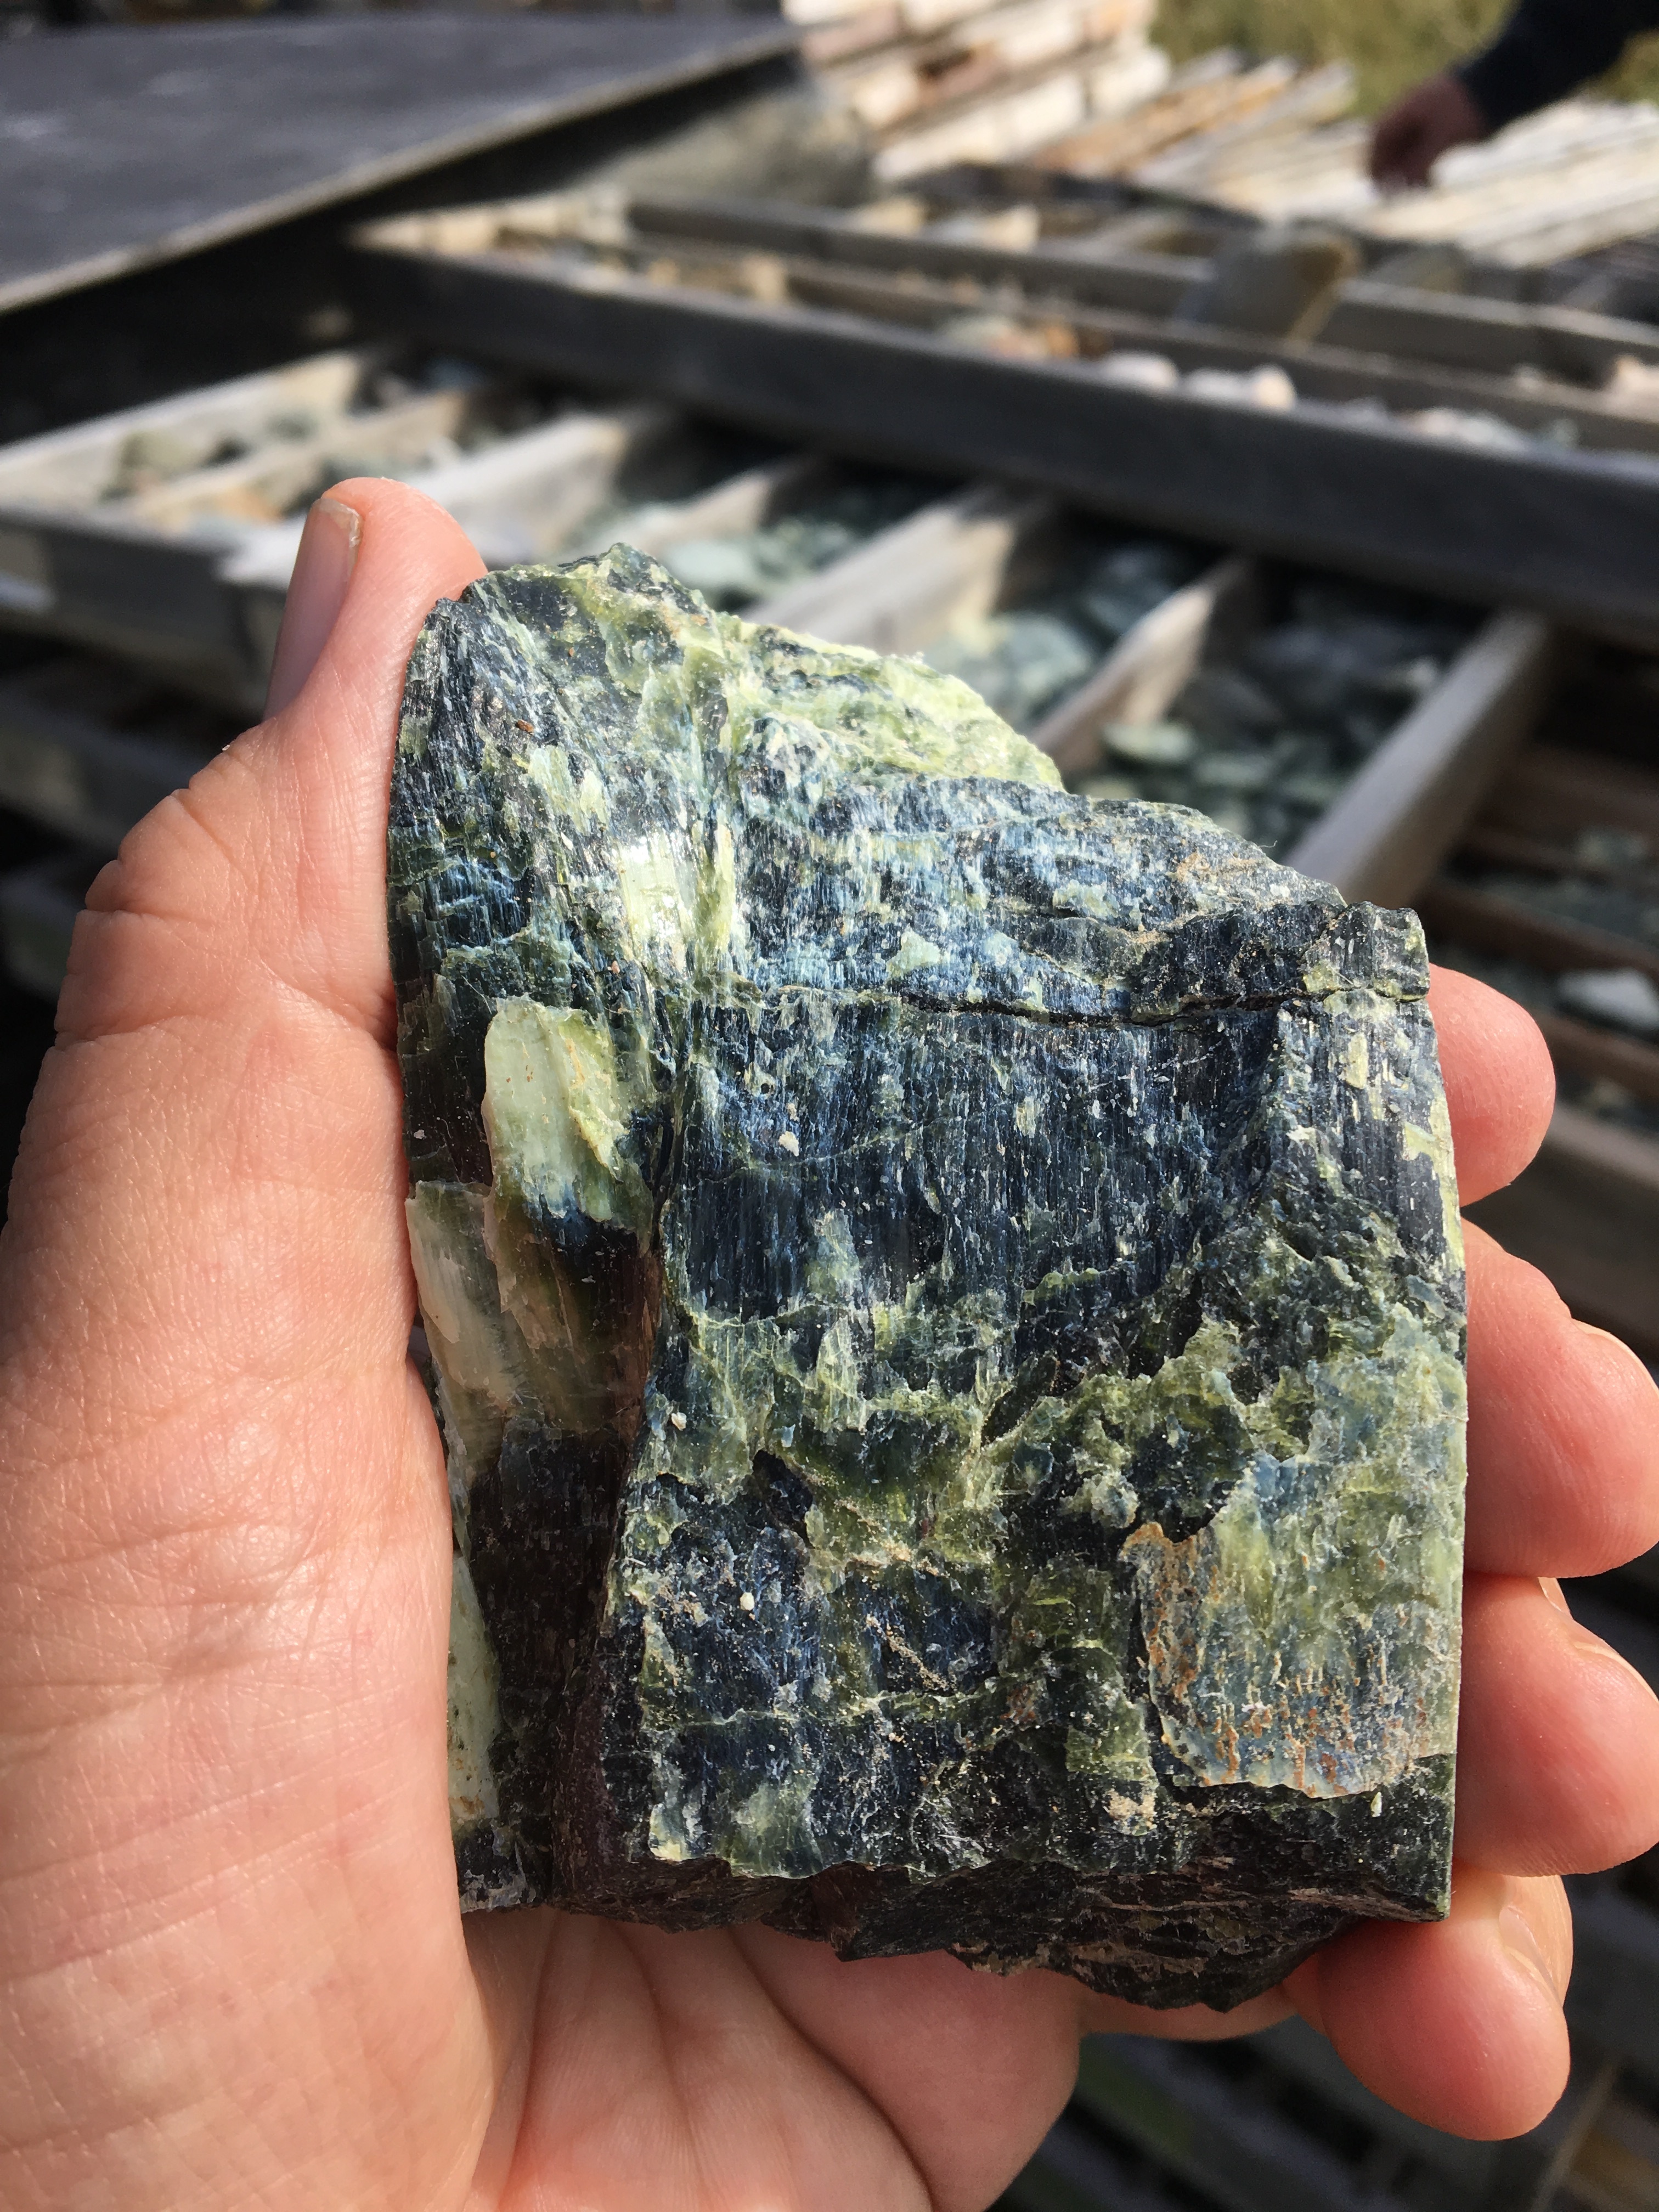 Nickel sulphide-bearing serpentinite from drill core.